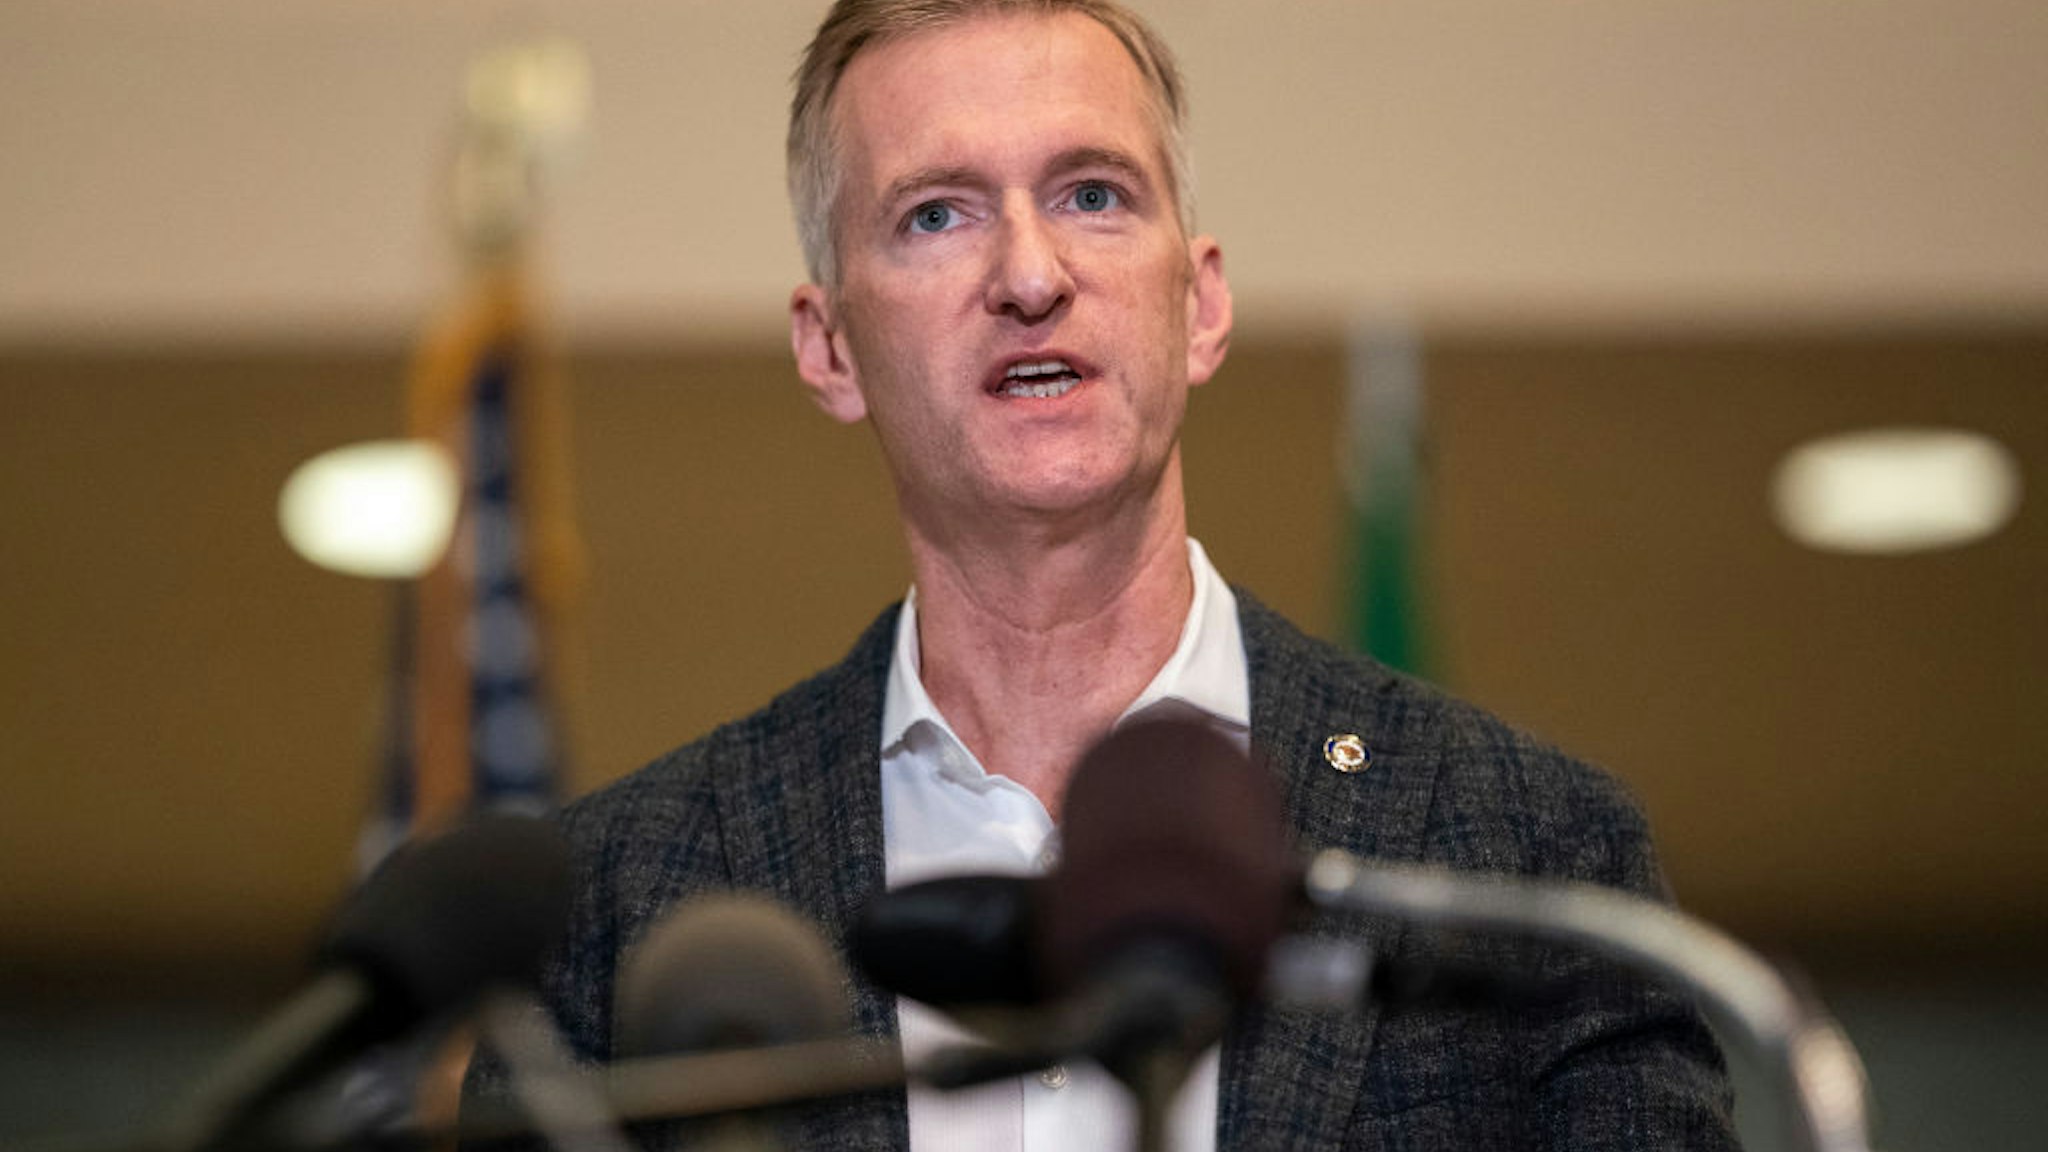 Portland Mayor Ted Wheeler speaks to the media at City Hall on August 30, 2020 in Portland, Oregon. A man was fatally shot Saturday night as a Pro-Trump rally clashed with Black Lives Matter protesters in downtown Portland.